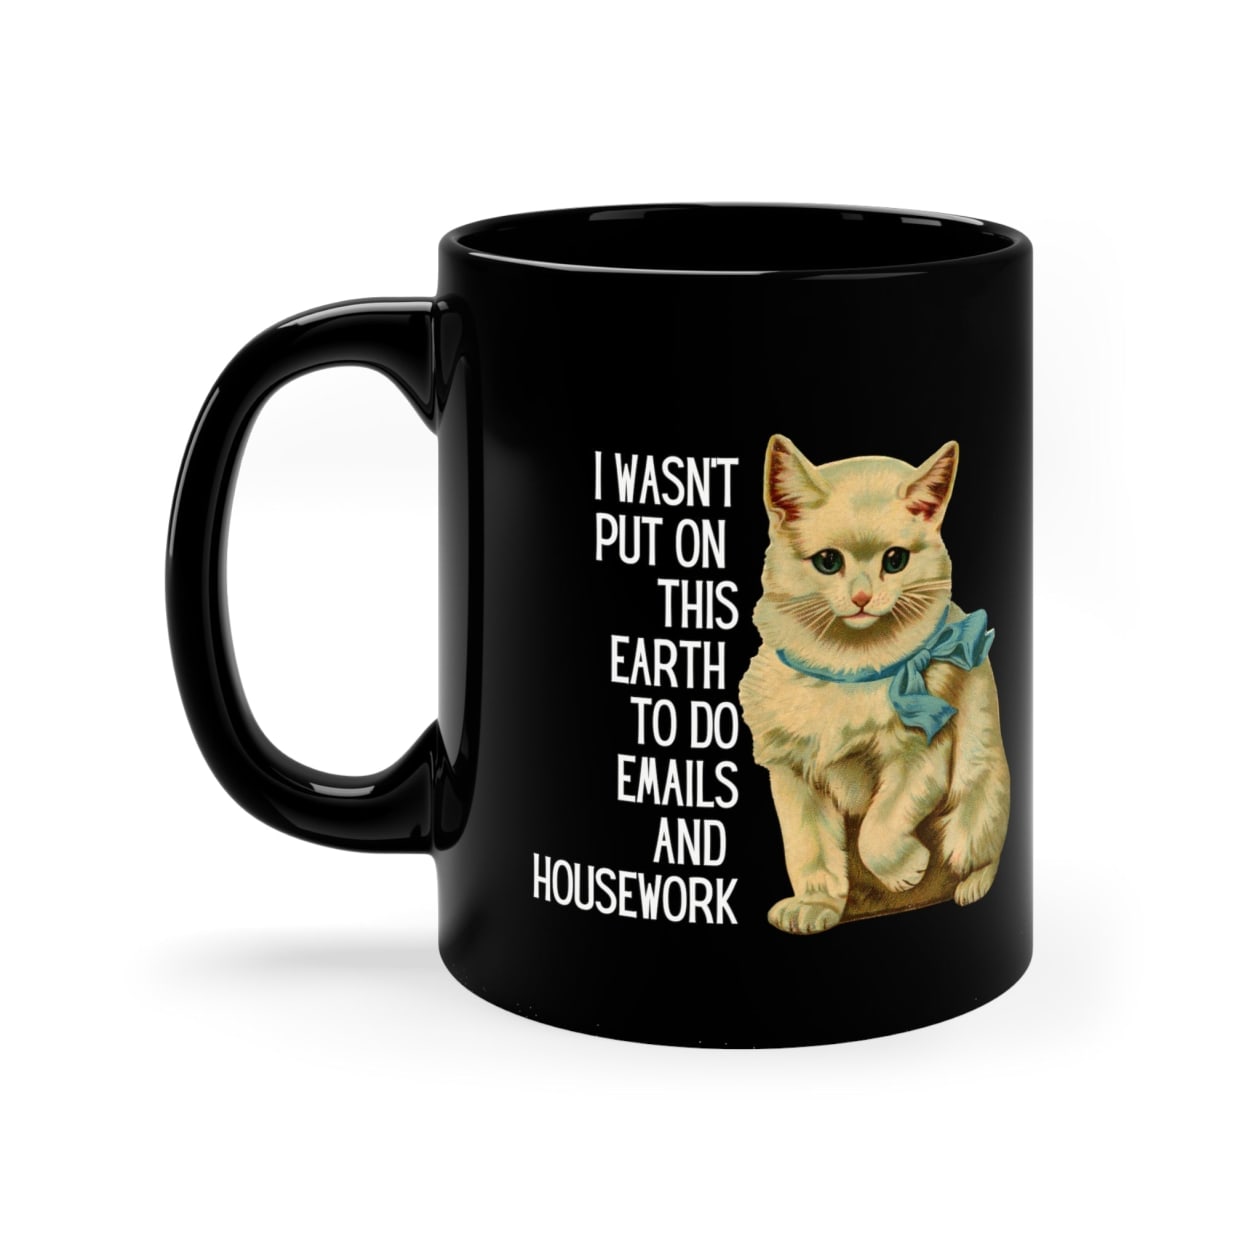 I Wasn't Put On This Earth To do Emails And Housework Black Kitten Mug - Size: 11oz